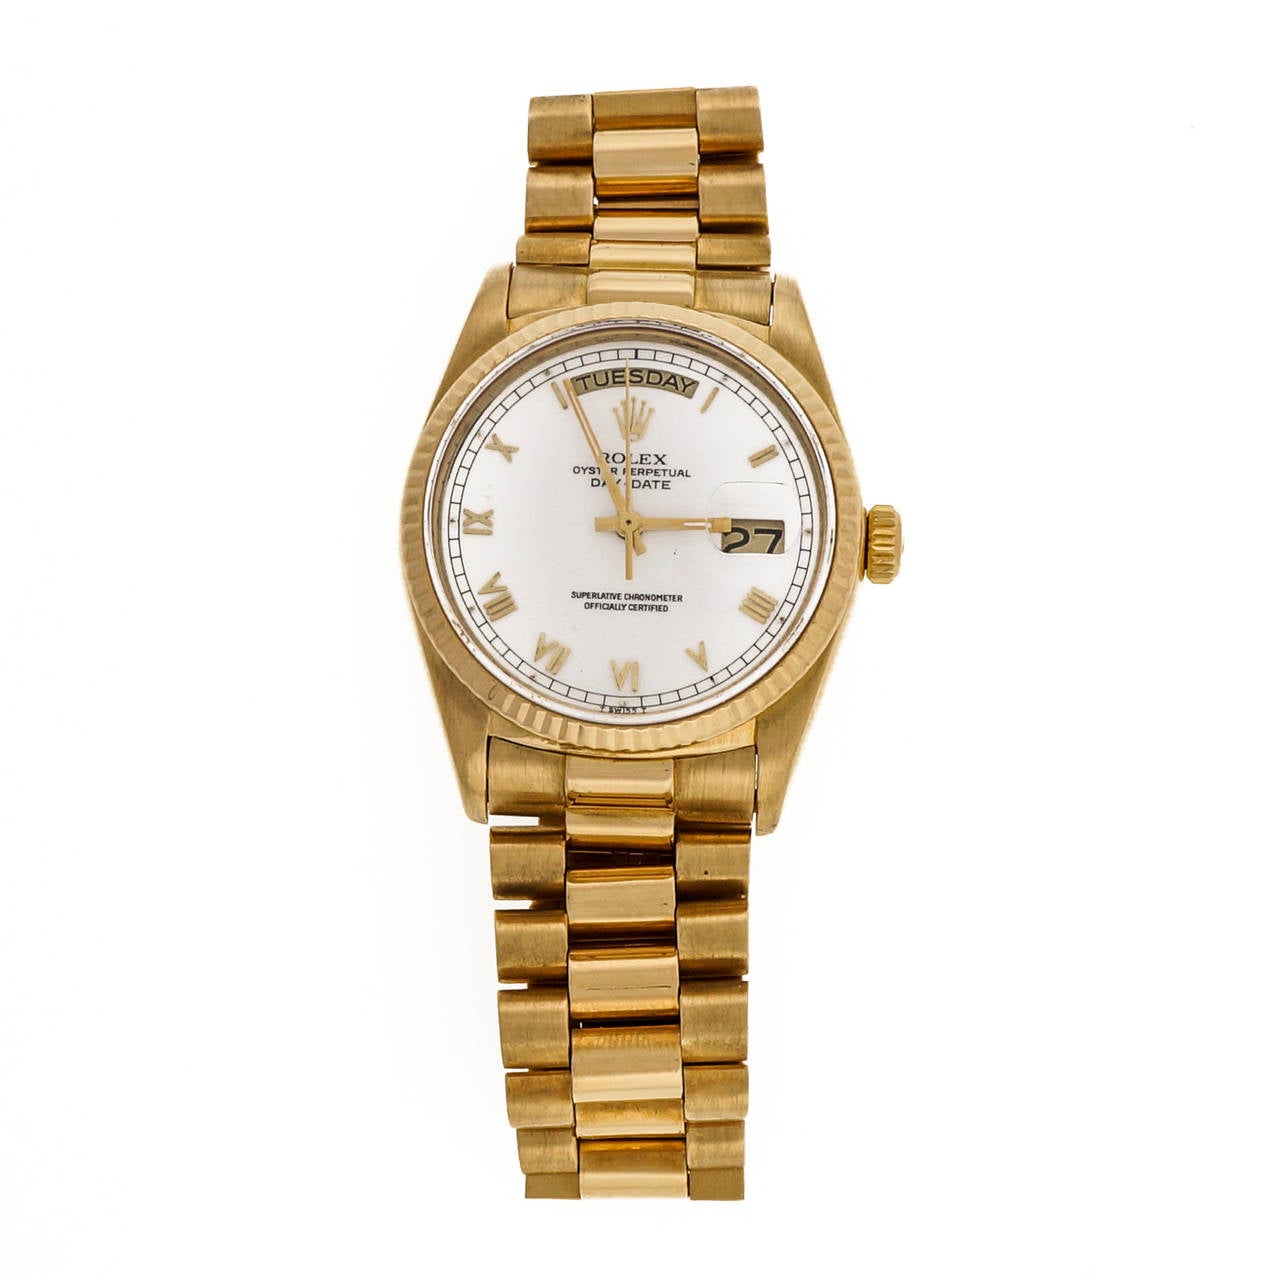 Rolex 18k Yellow Gold Day-Date President Wristwatch, Ref. 18108, with white dial, Roman numerals. Sapphire crystal. Single-quickset date. Circa 1985.

18k Yellow gold
Length: 43.54mm
Width: 36mm
Case thickness: 1212.4mm
Bracelet width at case: